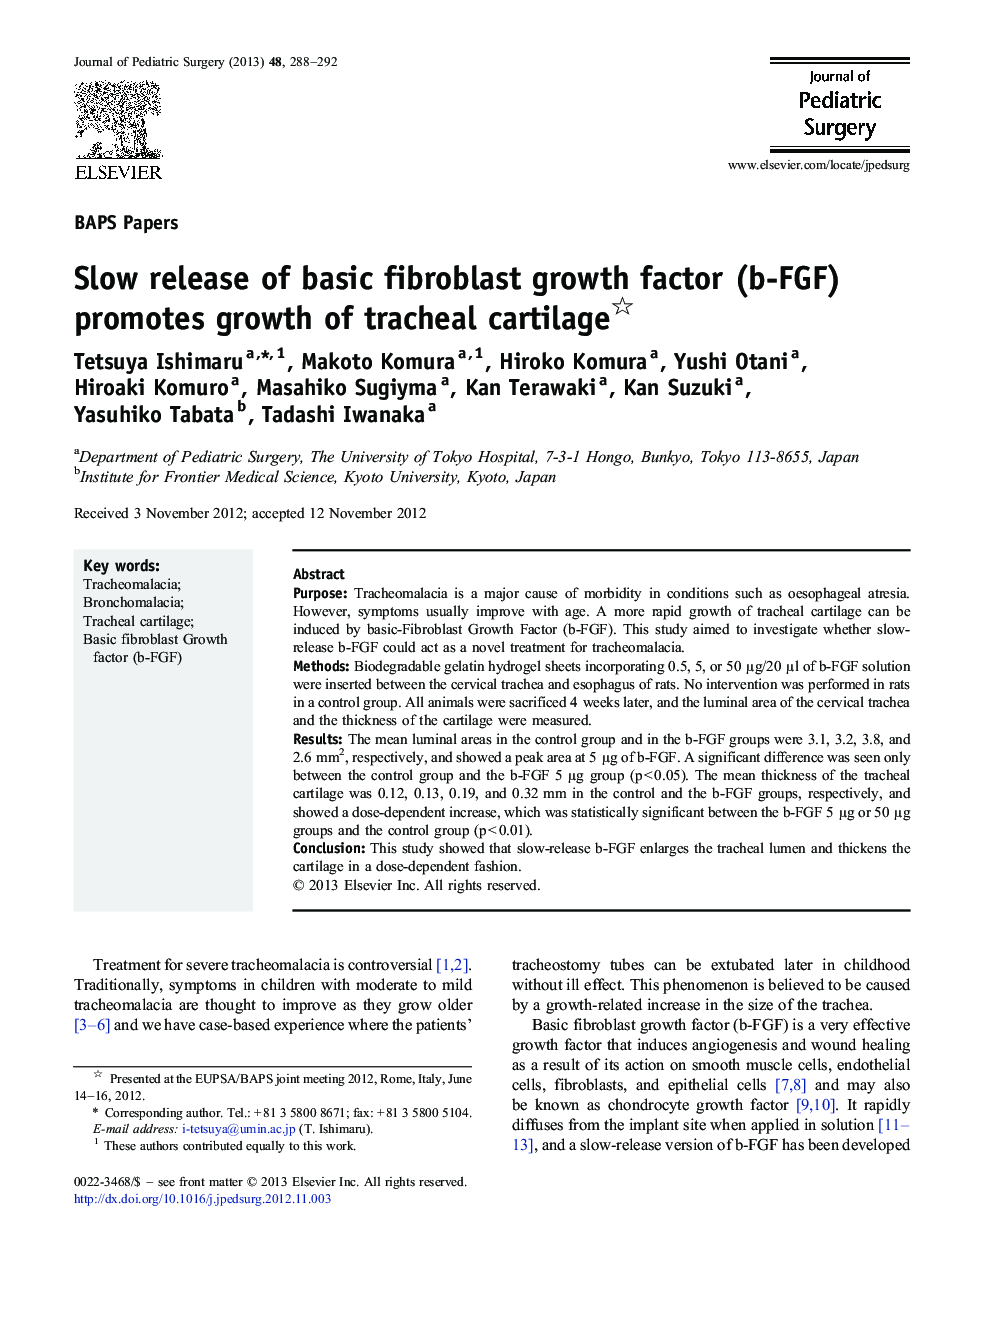 Slow release of basic fibroblast growth factor (b-FGF) promotes growth of tracheal cartilage